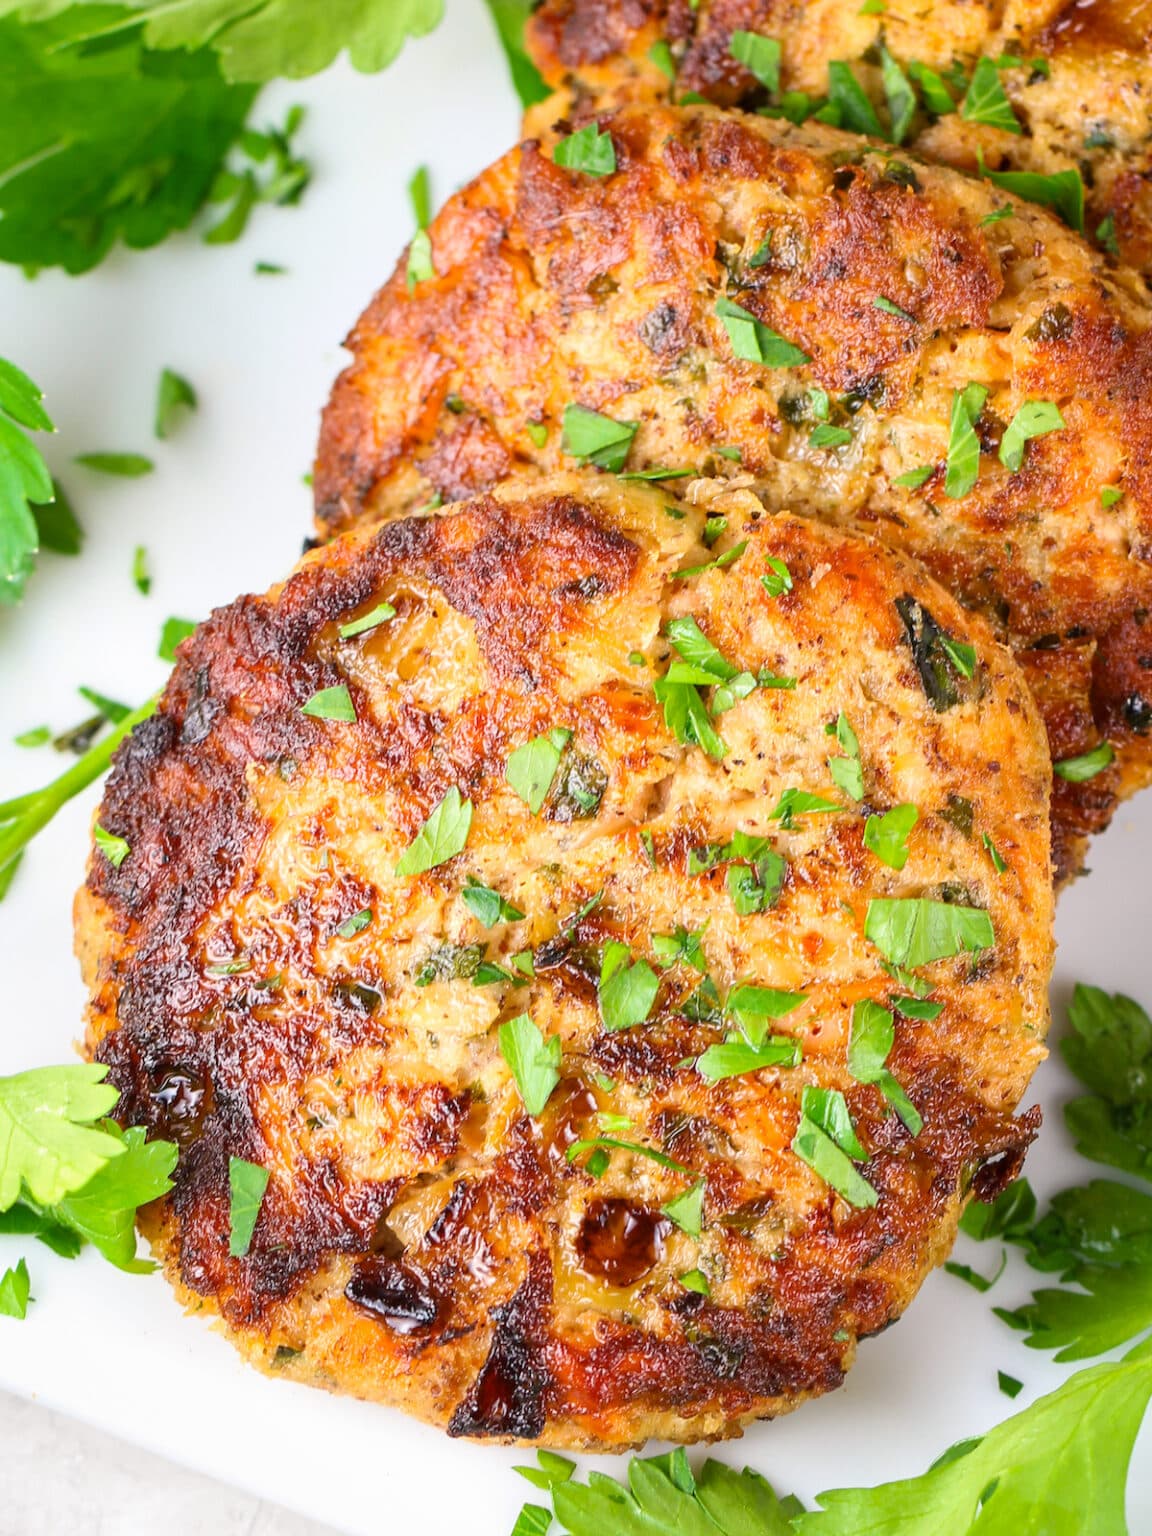 Easy Low Carb Salmon Patty Recipe - Taste And See